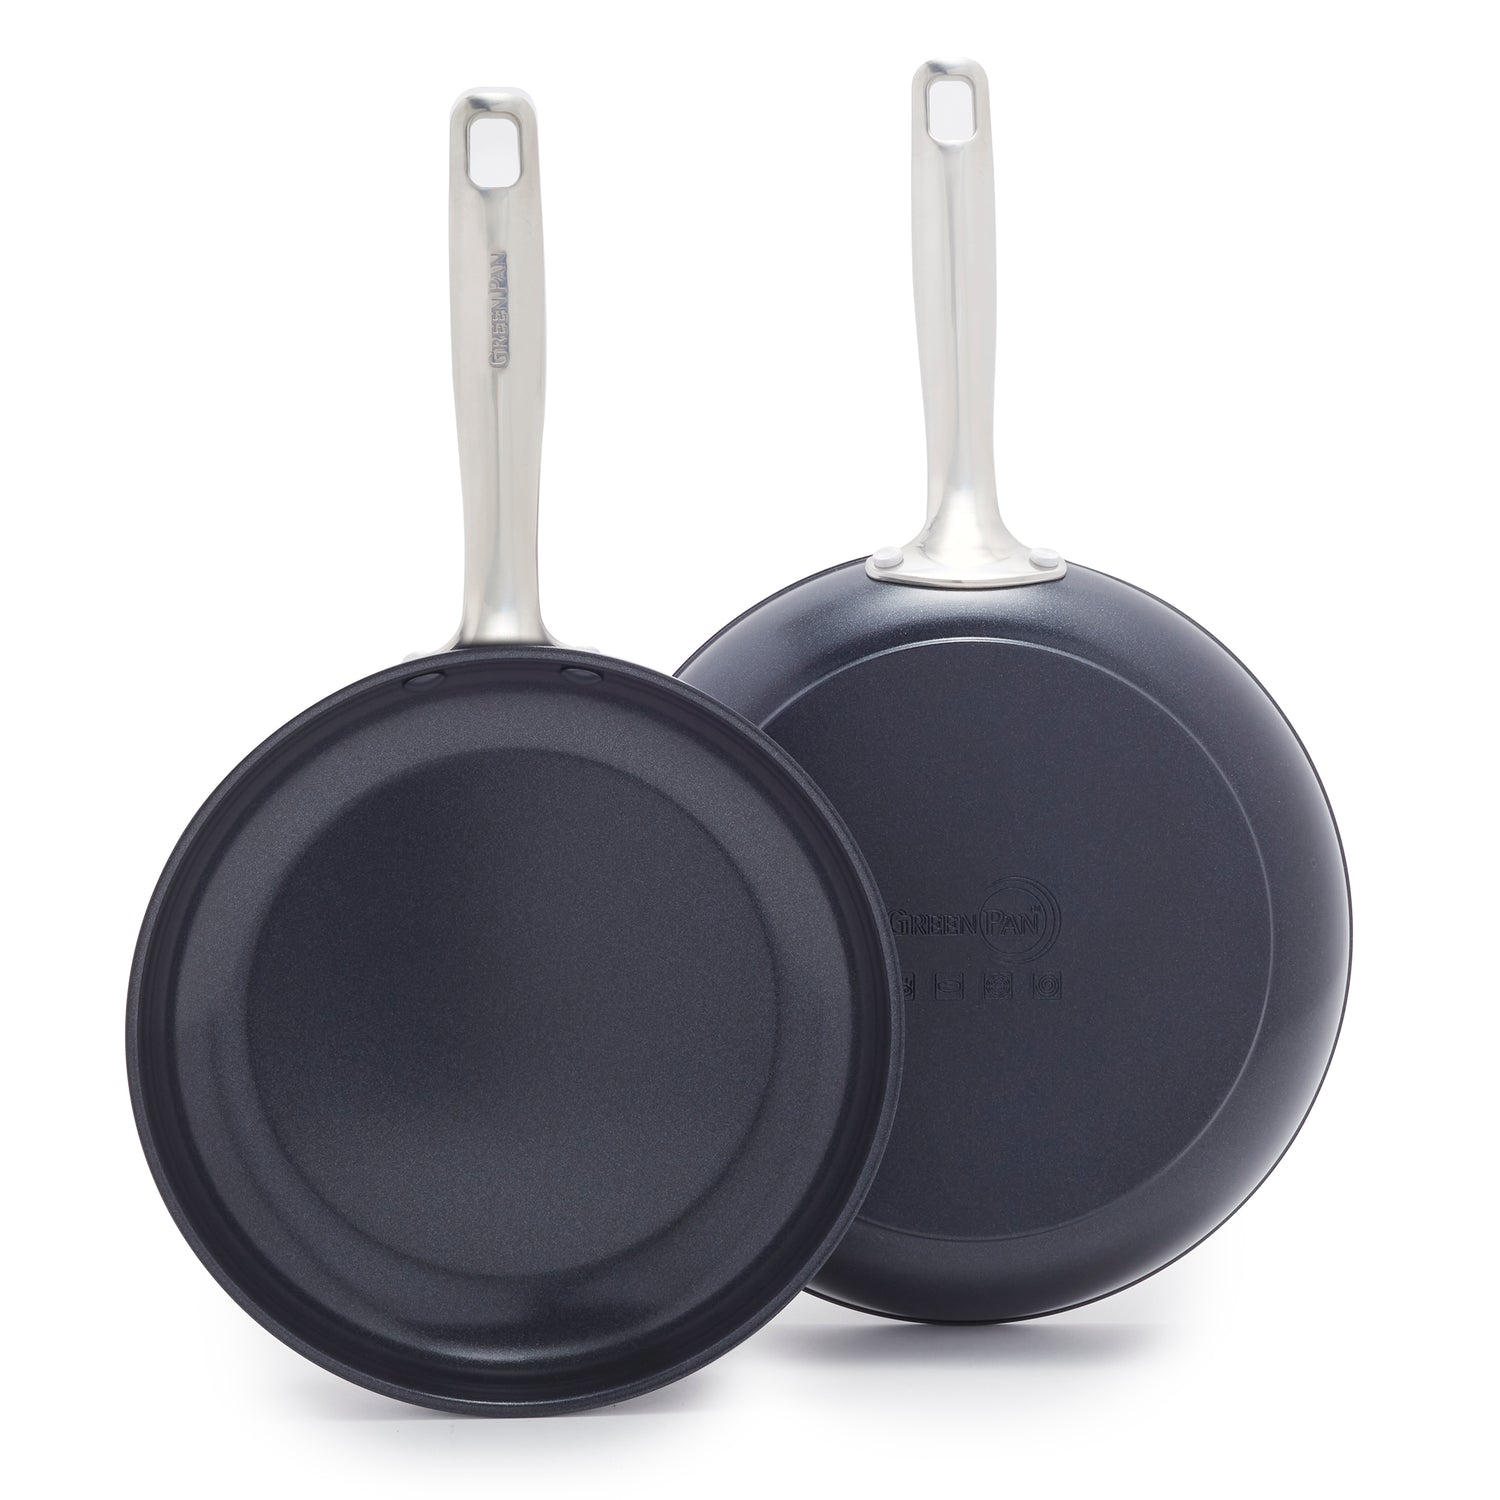 Chatham Ceramic Nonstick 8, 9.5 and 11 Frypan Set